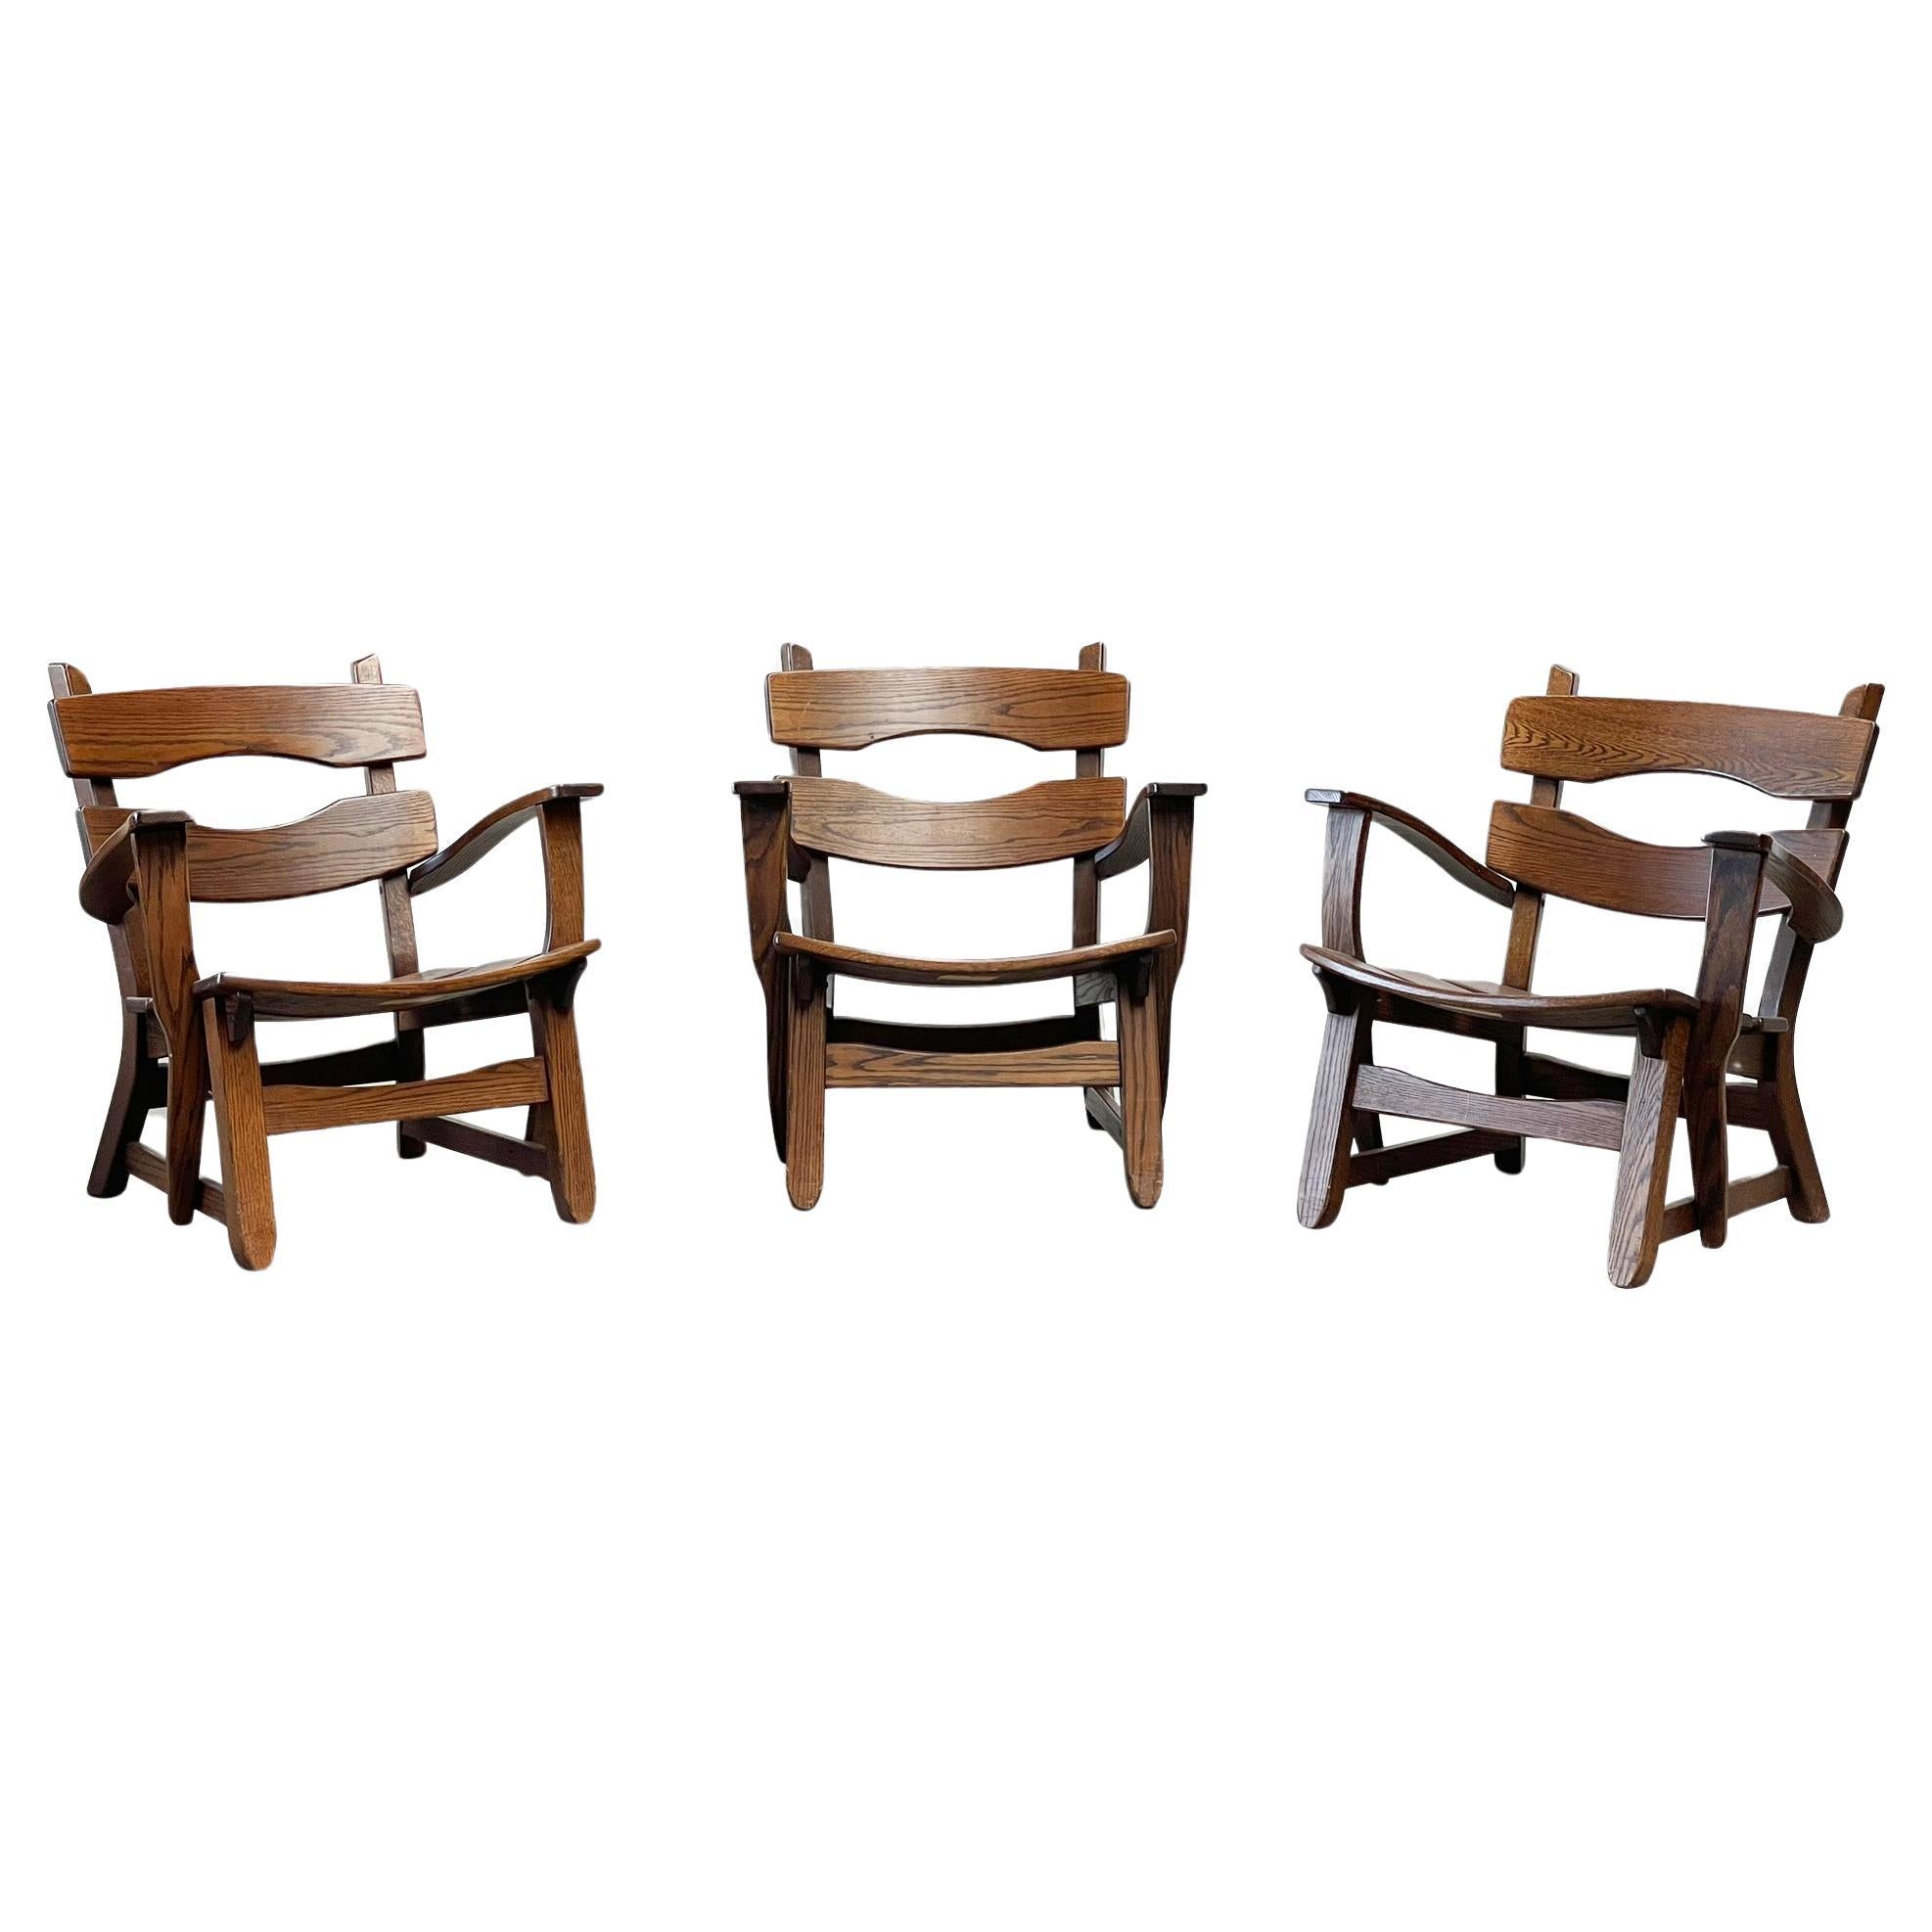 Rare wooden lounge Chairs from Dittmann & co For Sale